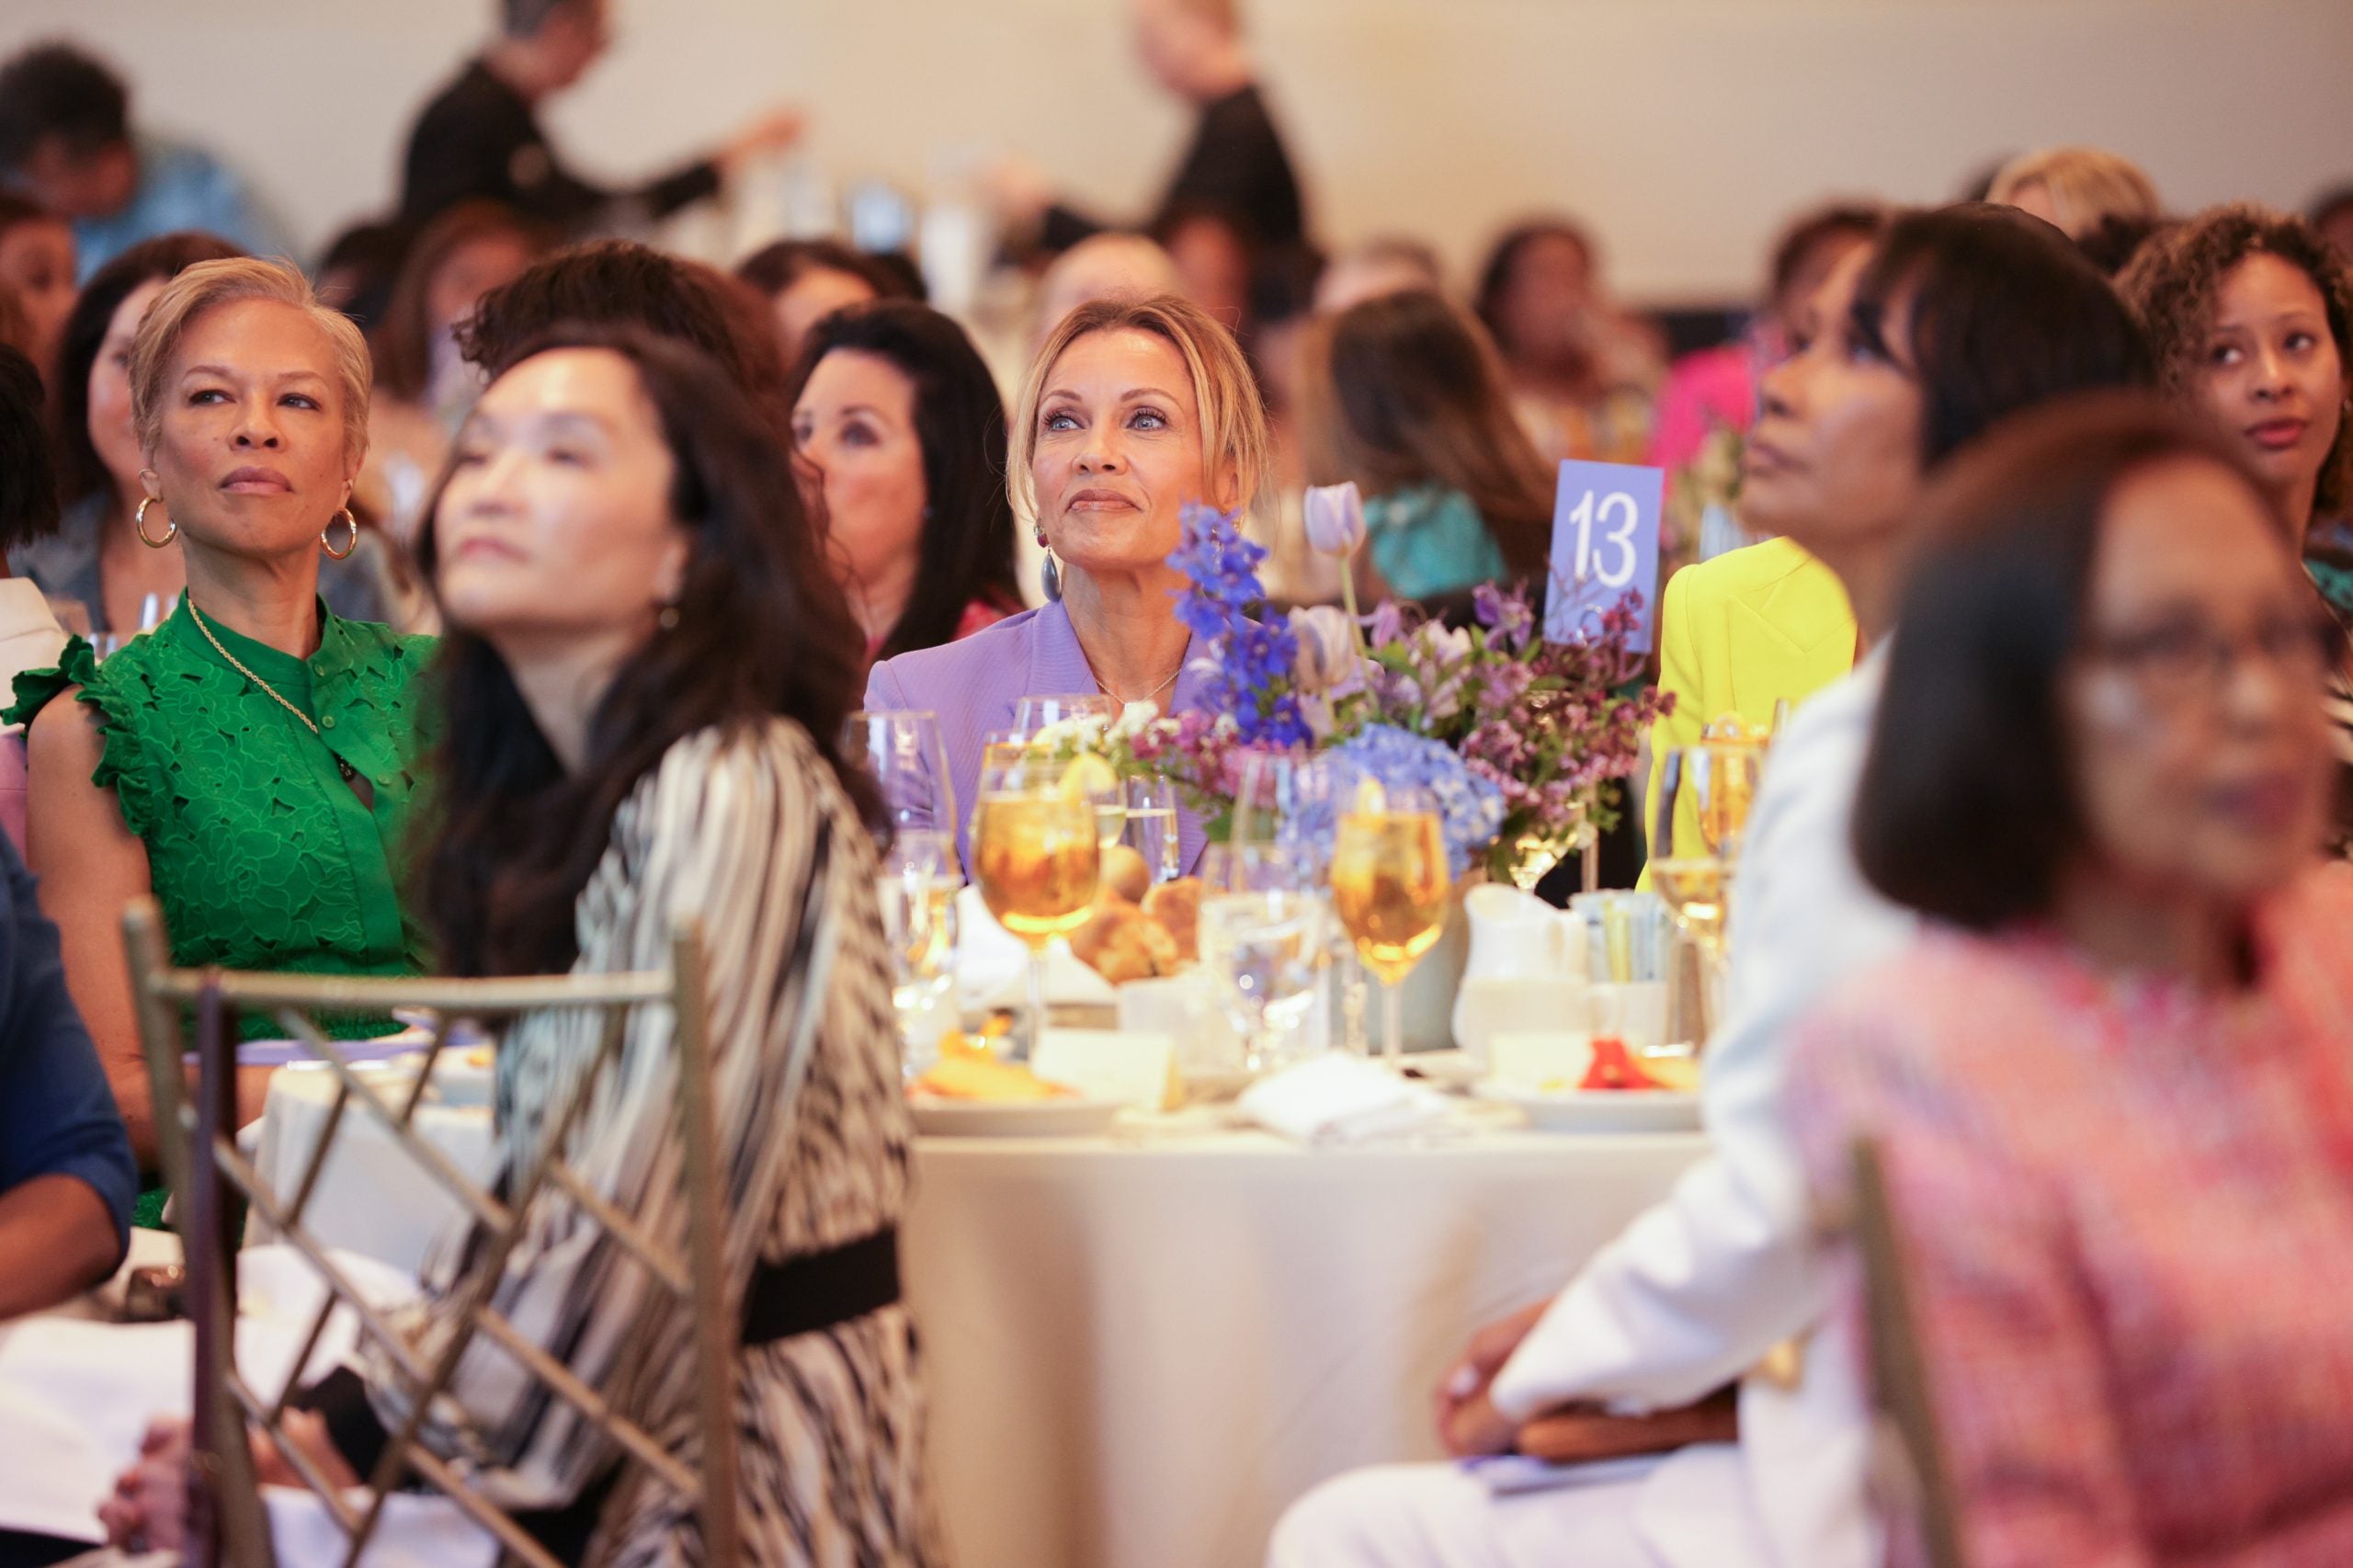 Vanessa Williams, Lynn Whitfield, and More Support Arts Education at Studio Museum in Harlem’s Spring Luncheon